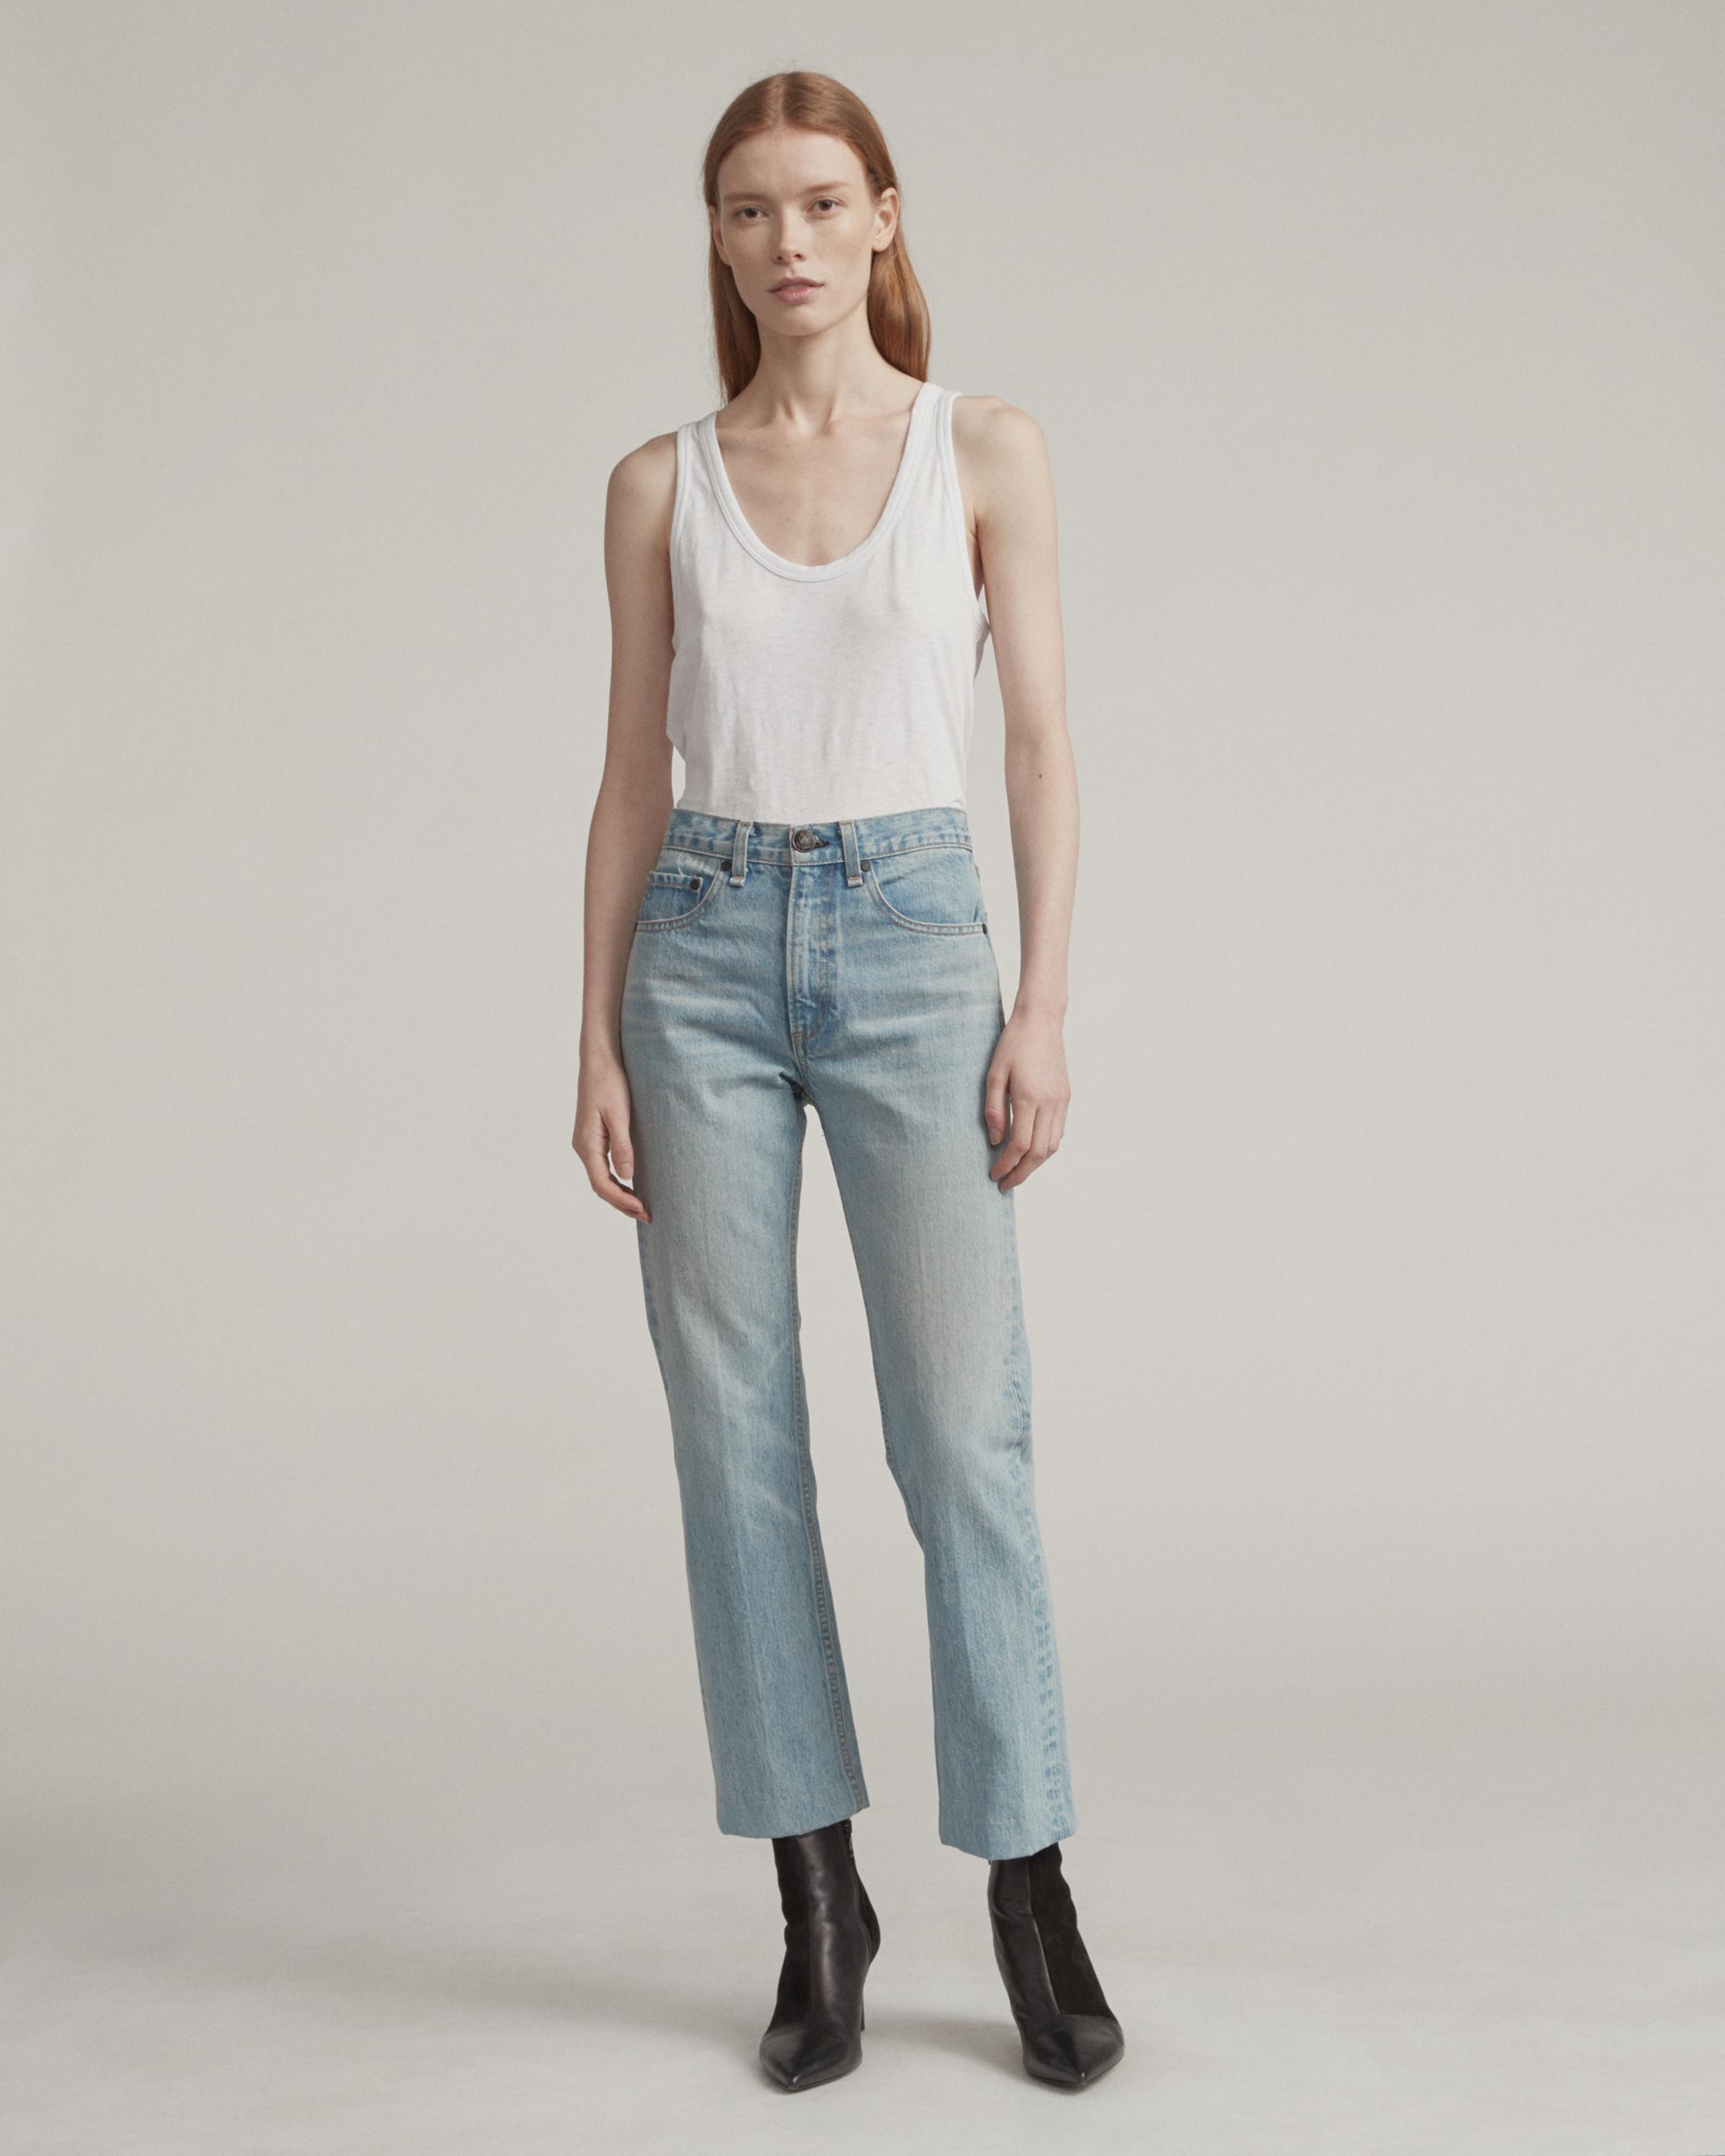 New Arrivals in Womens Clothing Shoes & Accessories | rag & bone